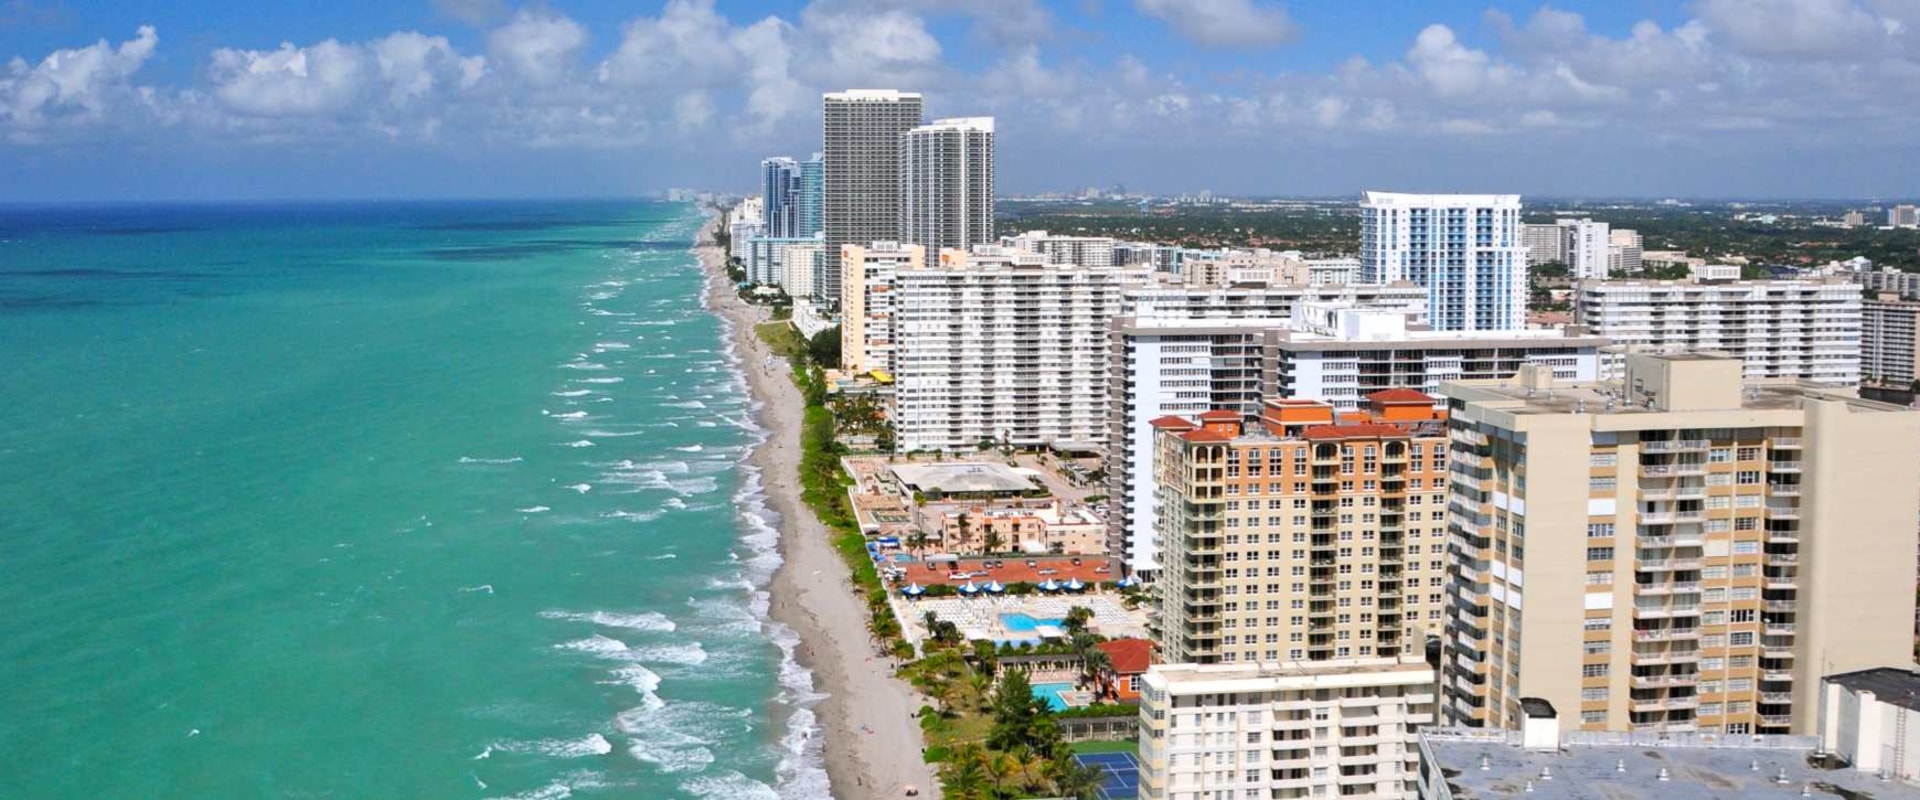 Vent Cleaning Service in Sunny Isles Beach FL Unraveled